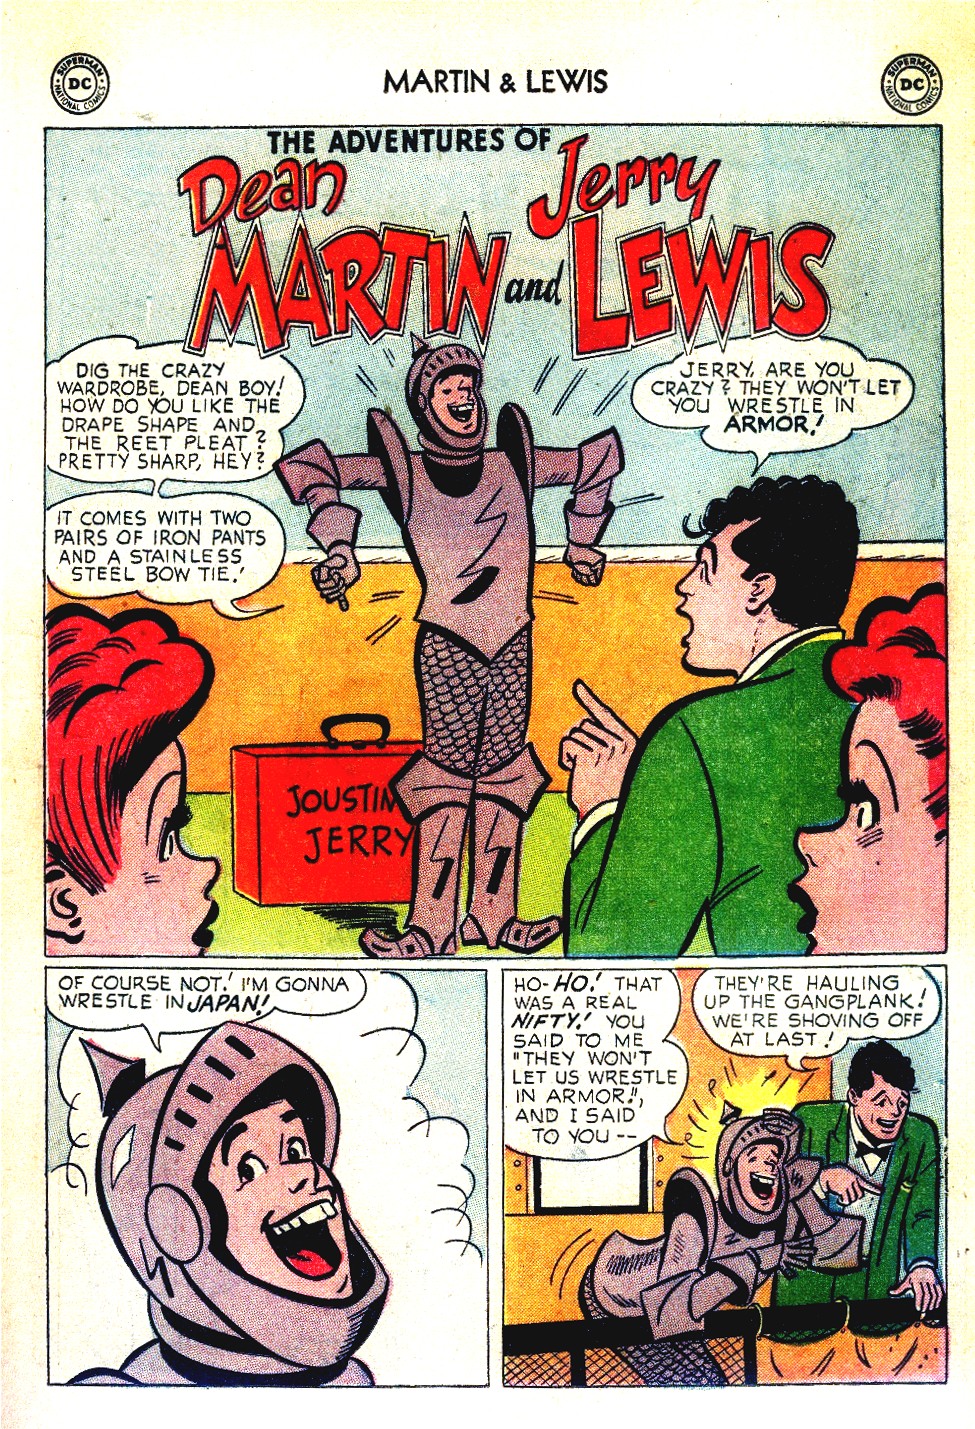 Read online The Adventures of Dean Martin and Jerry Lewis comic -  Issue #13 - 13